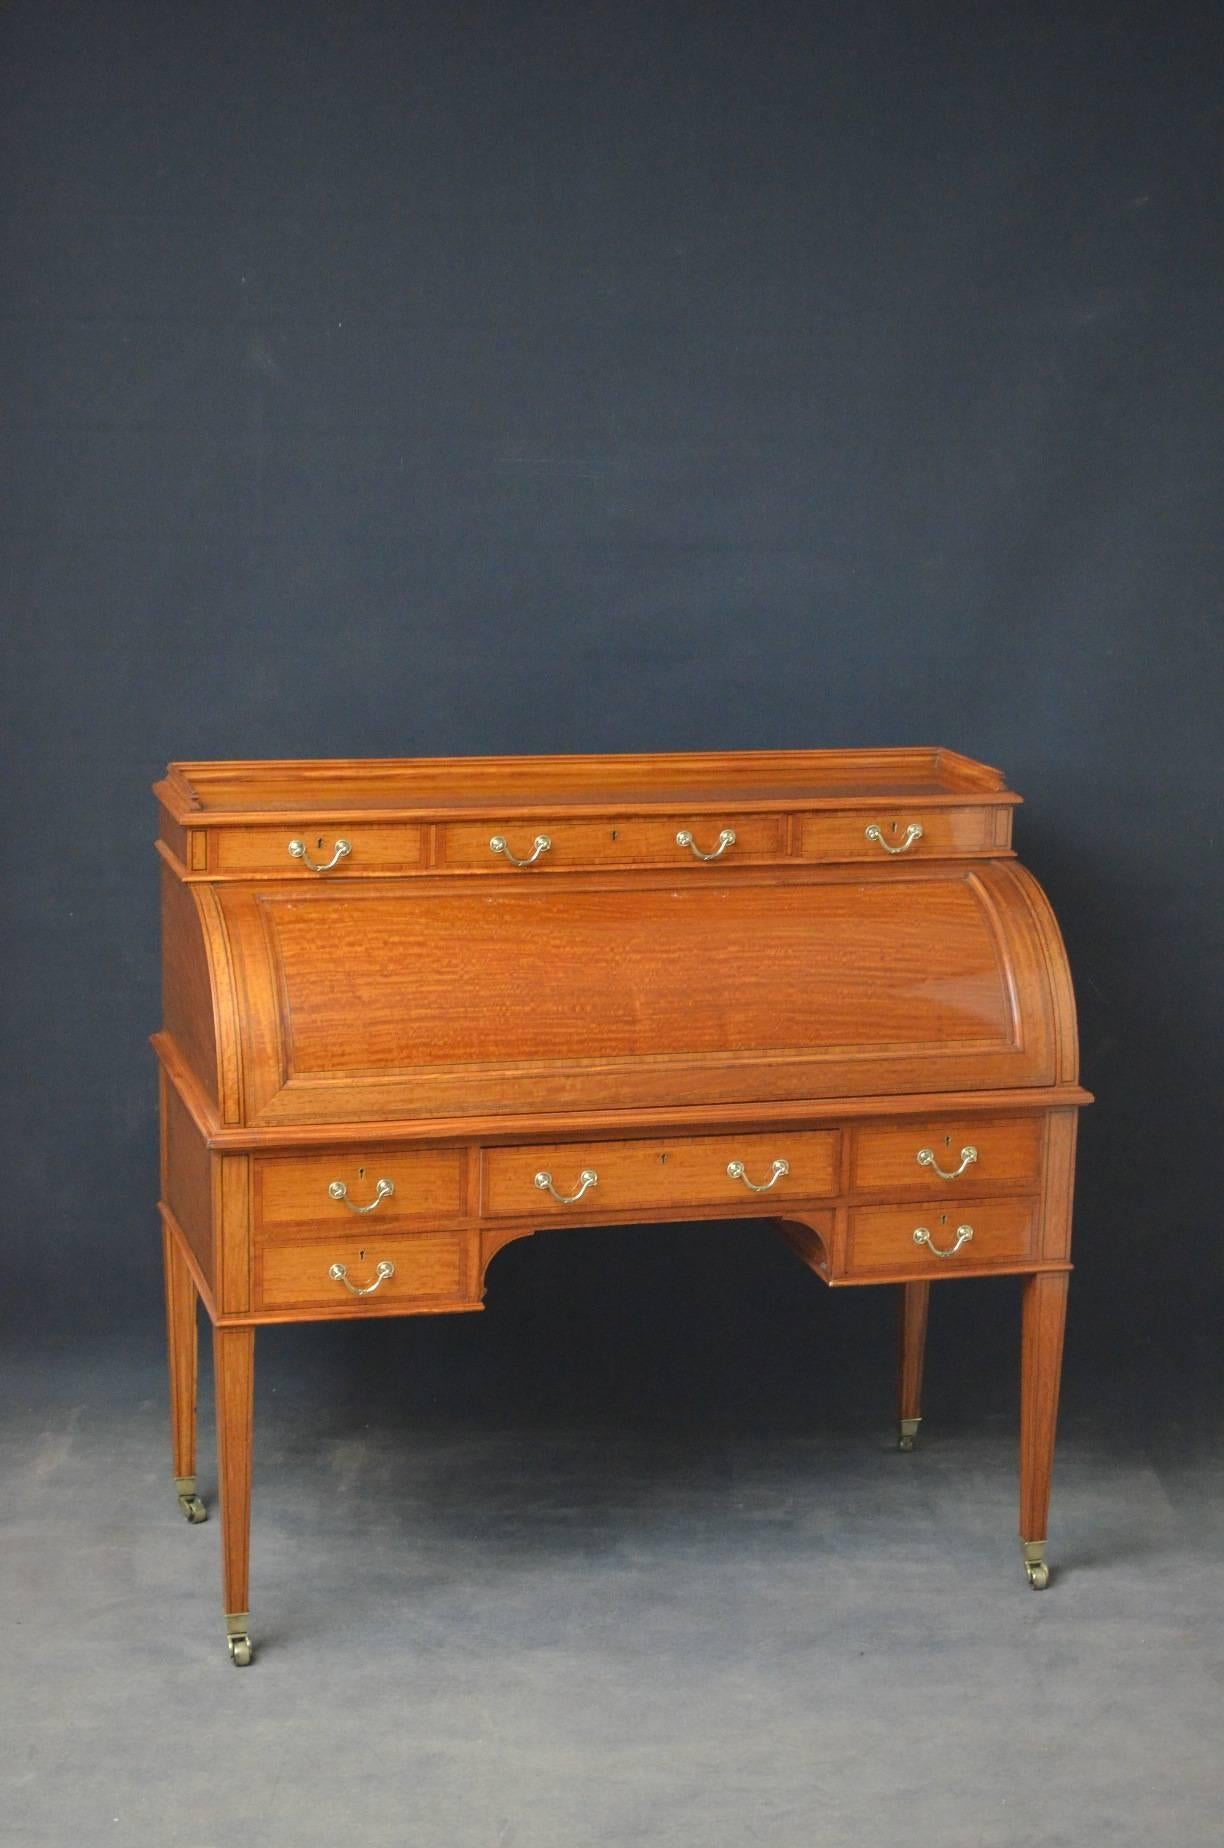 Sn4097 Superb quality and very attractive, late Victorian satinwood cylinder bureau by Maples & Co, having fine gallery to top and three mahogany lined drawers fitted with original brass handles above cylinder front which open to reveal small